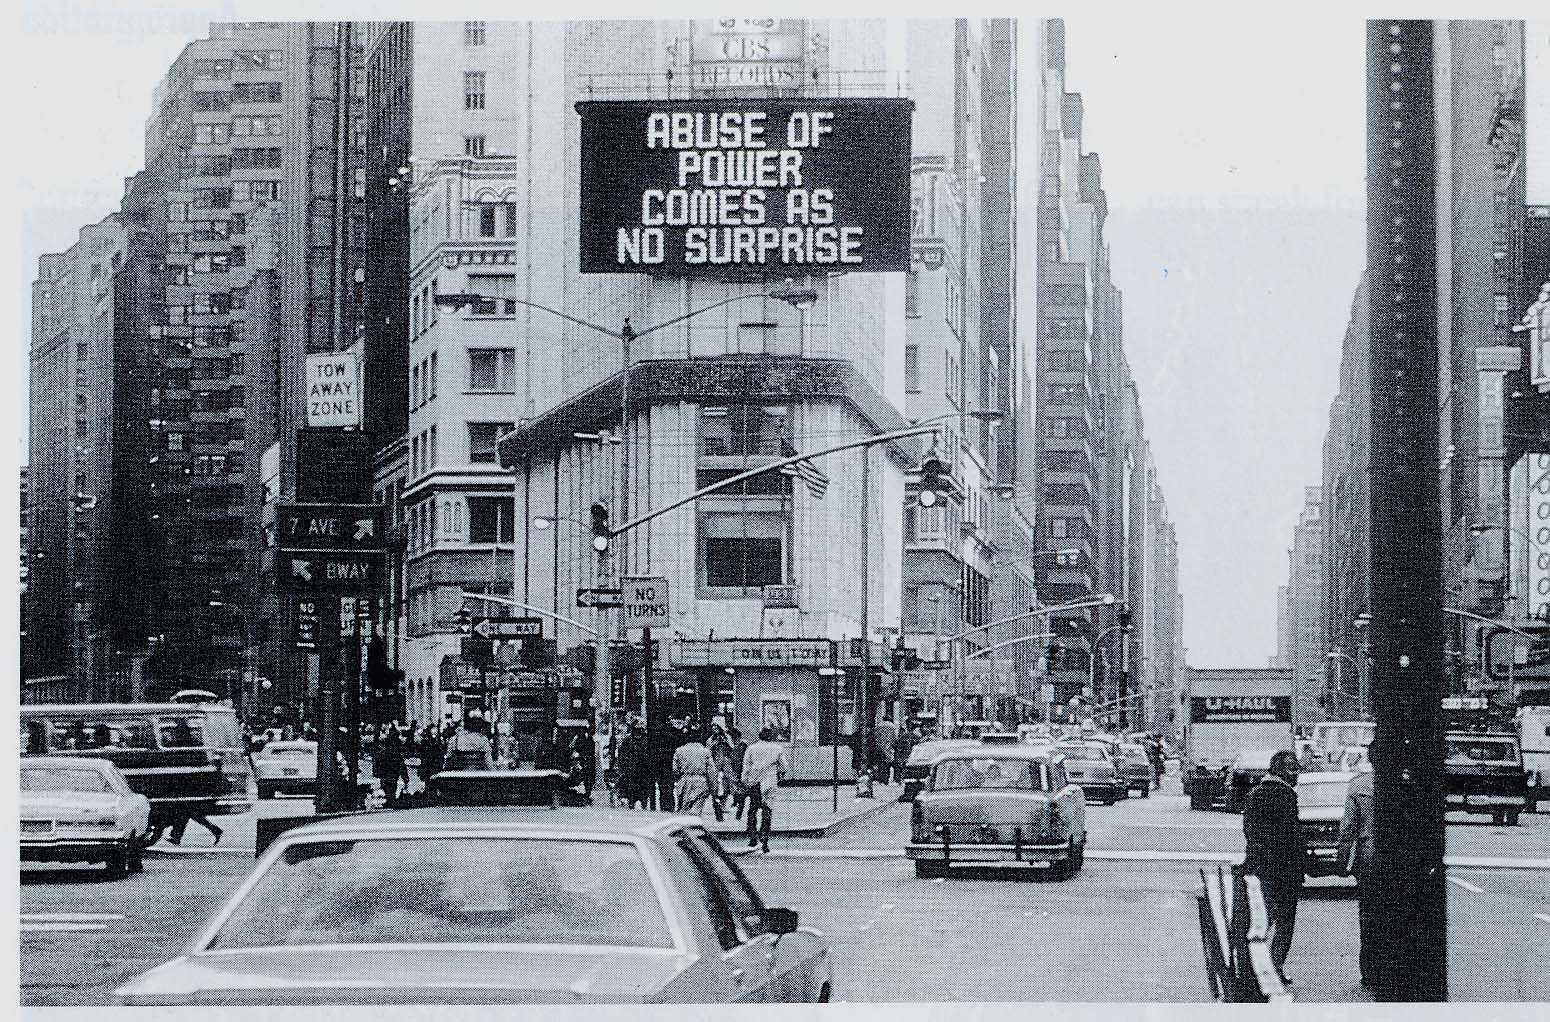 Image: Jenny Holzer, Abuse of Power Comes As No Surprise (1982). Photo credit: John Marchael. Courtesy: Jane Dickson. © Jenny Holzer, Artists Rights Society (ARS), New York.